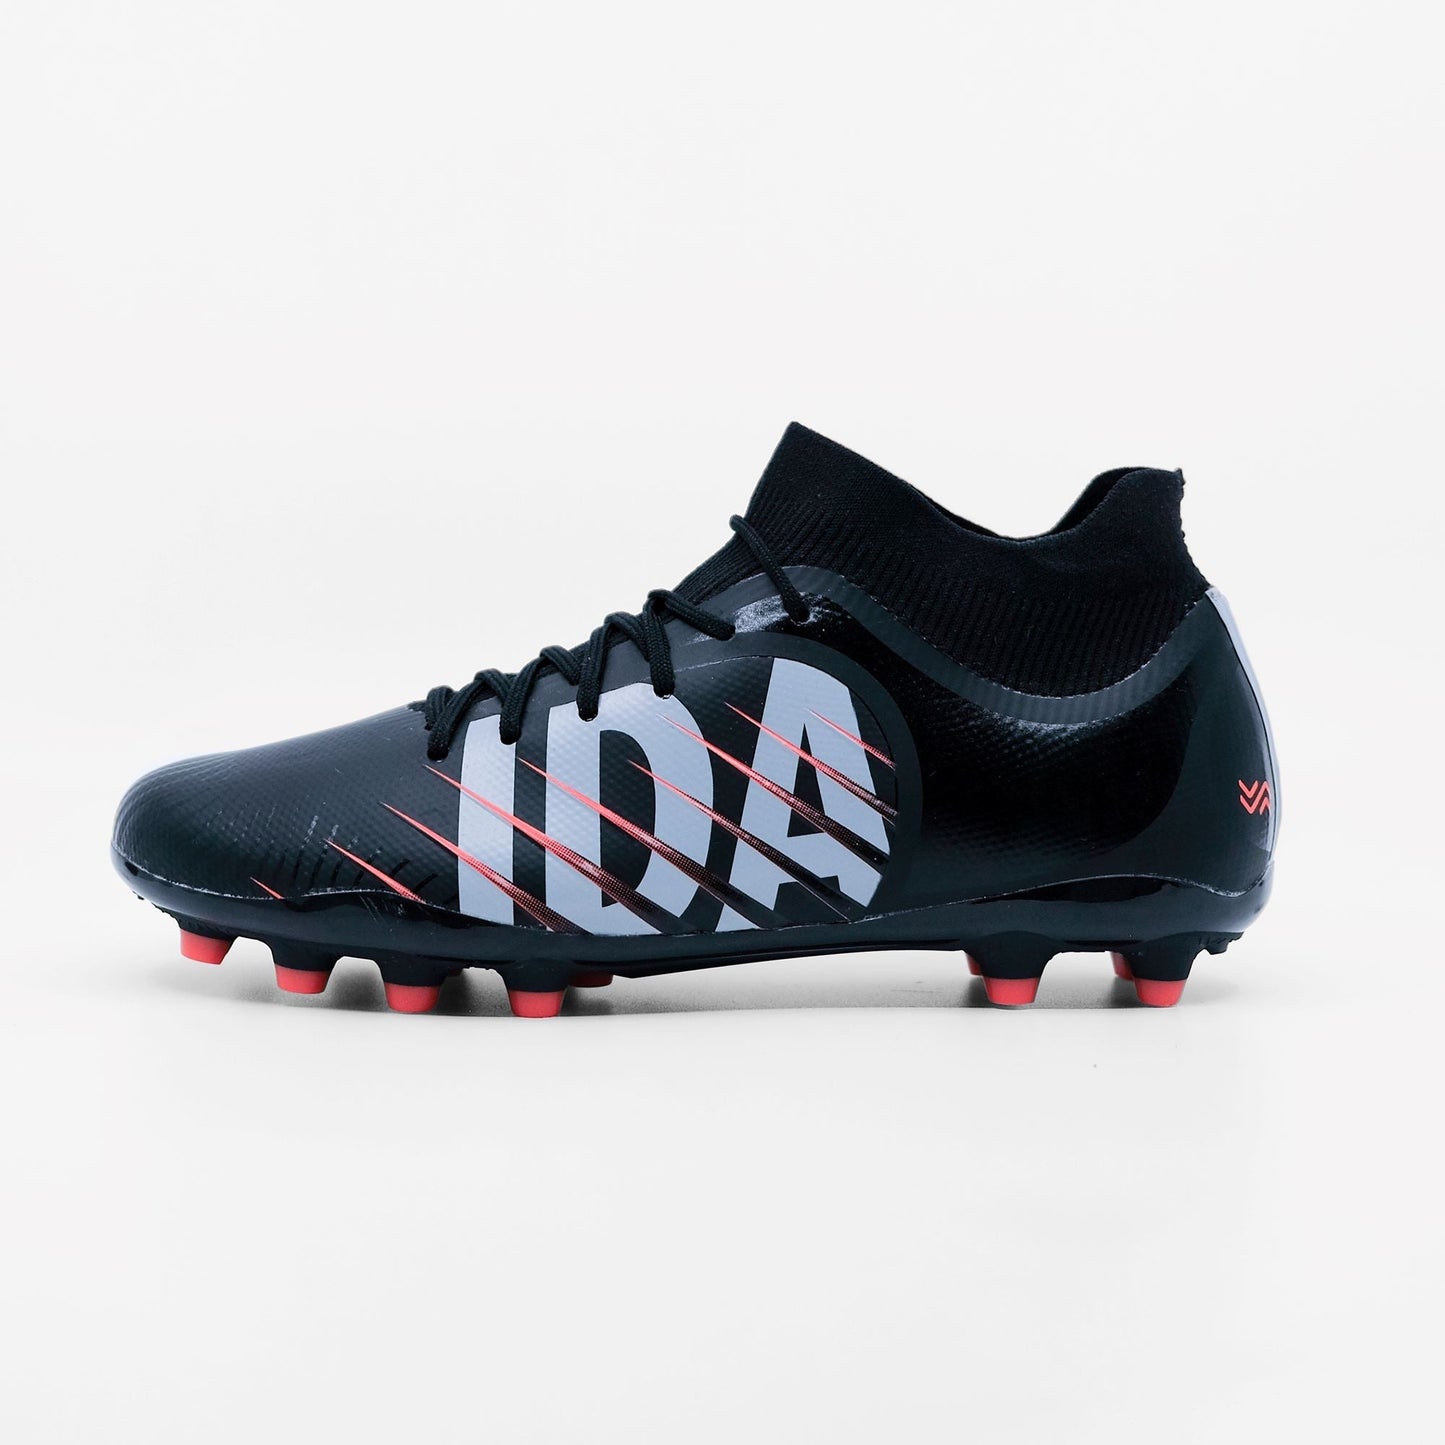 IDA Rise Women's Soccer Cleat, Black, FG/AG, Firm Ground, Artificial Ground, Ankle sock